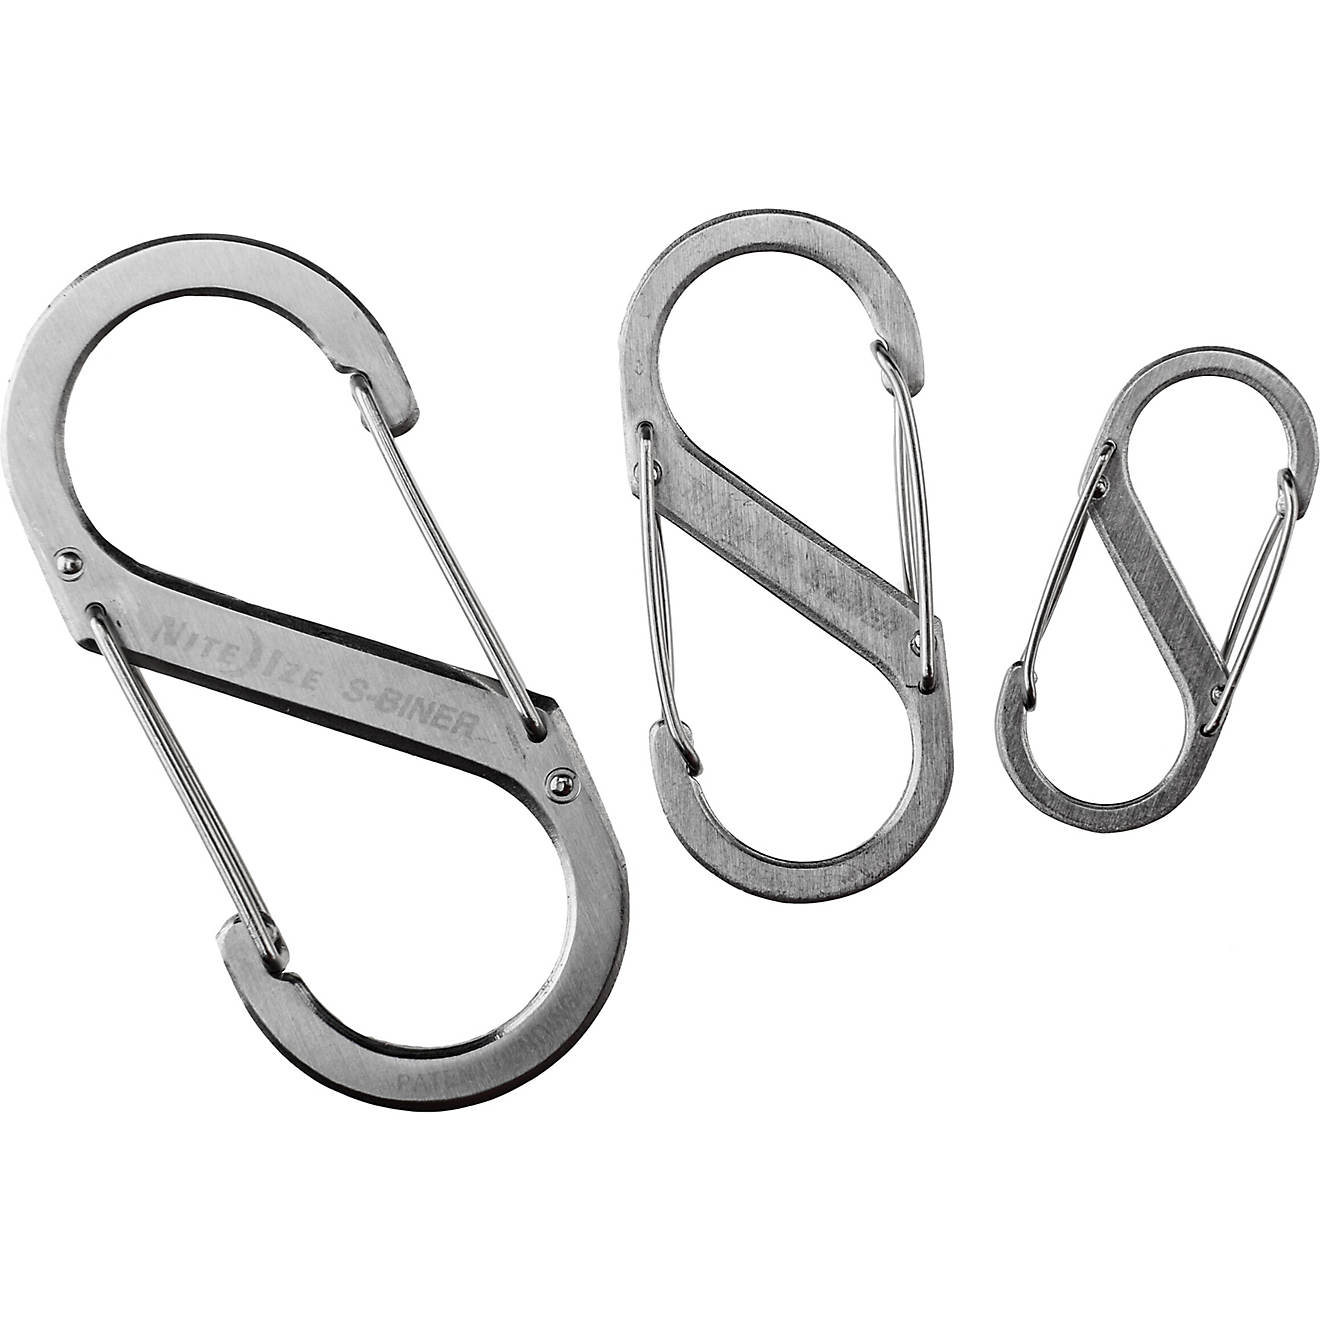 Nite Ize S-Biner 3 Pack SILVER Stainless Steel Sizes #2,#3 and #4 Carabiner 